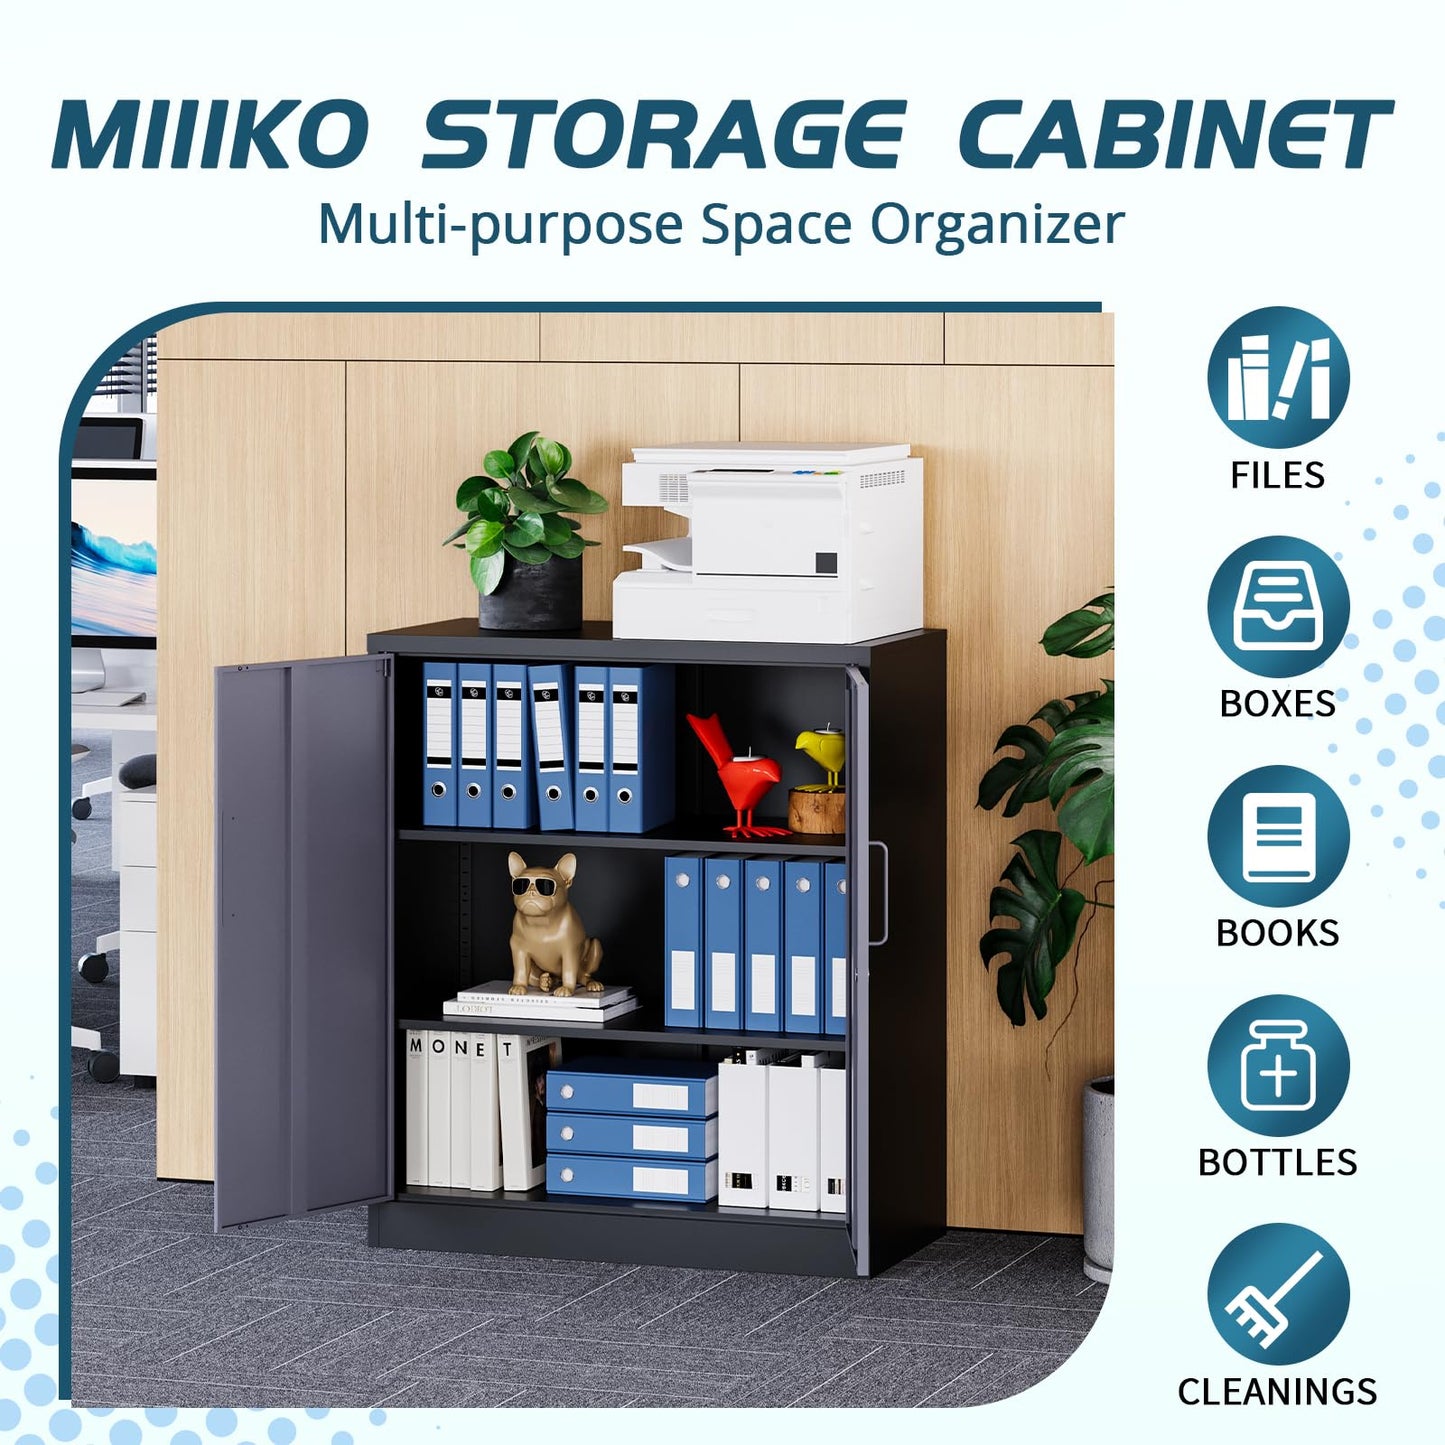 MIIIKO Metal Storage Cabinet, Base Cabinets 2 Door, Steel Storage Cabinets with Locking Doors and Shelves for Garage, Kithen, Home Office and Classroom